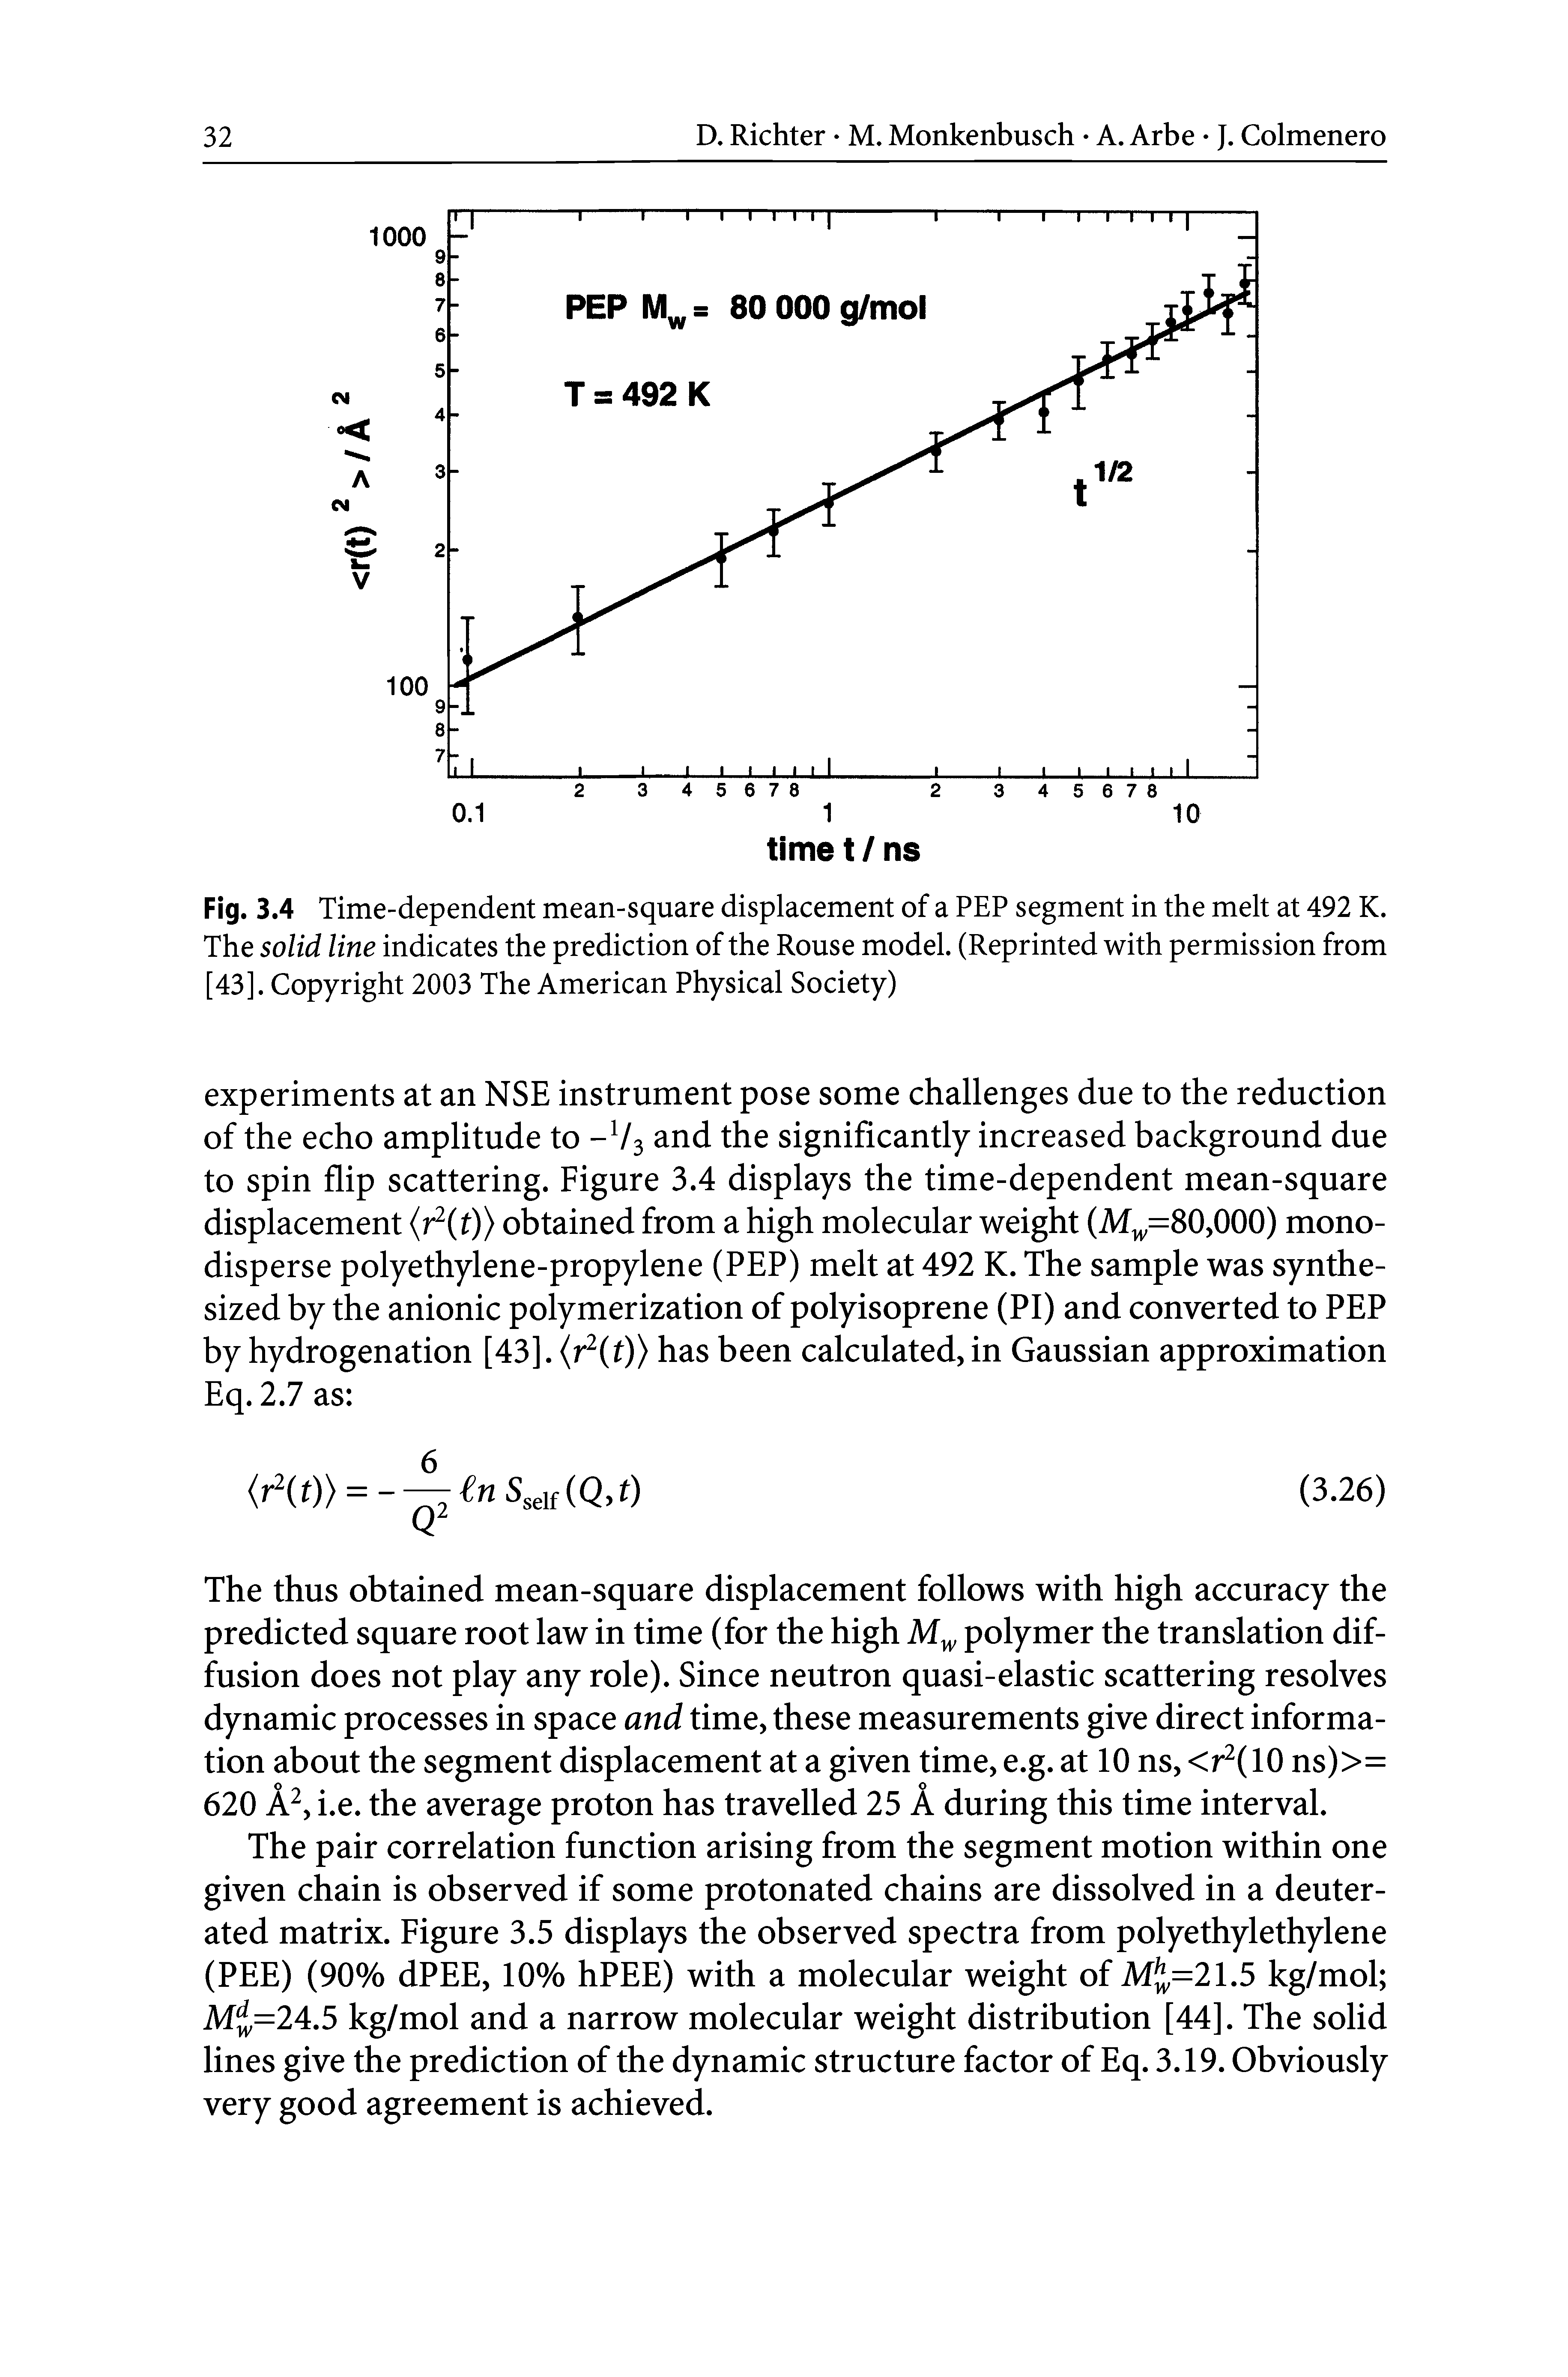 Fig. 3.4 Time-dependent mean-square displacement of a PEP segment in the melt at 492 K. The solid line indicates the prediction of the Rouse model. (Reprinted with permission from [43]. Copyright 2003 The American Physical Society)...